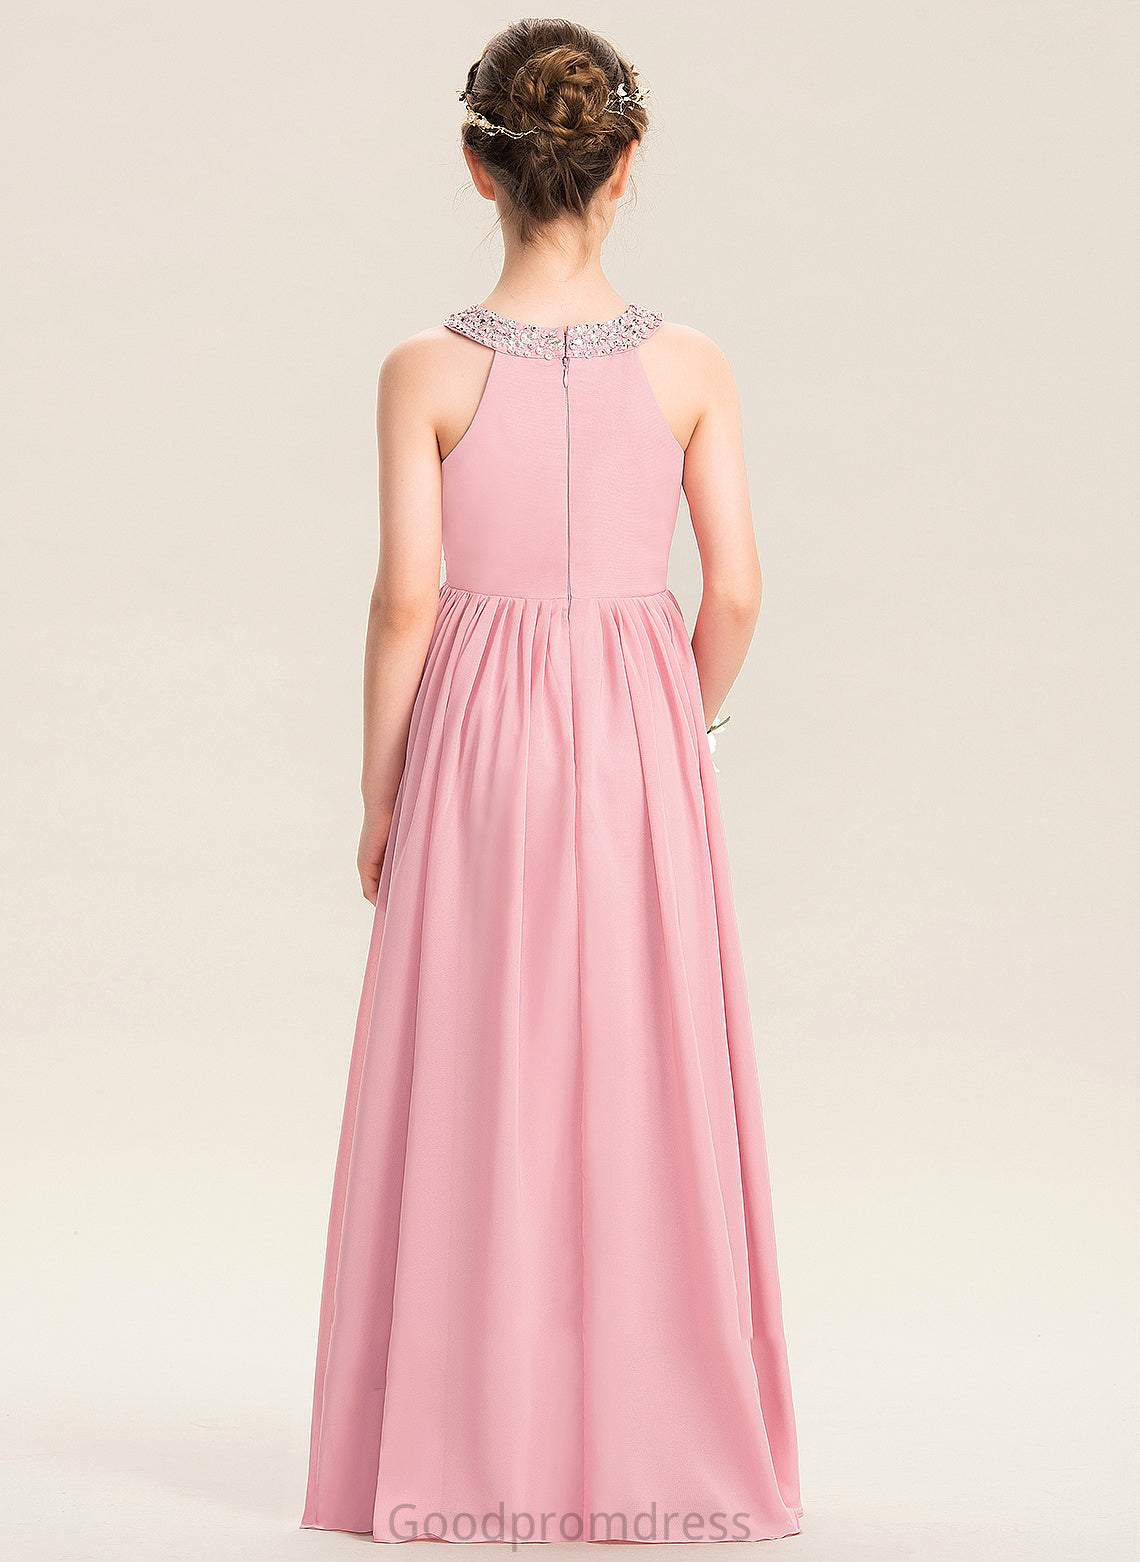 Lace Floor-Length Neck Junior Bridesmaid Dresses Sherlyn Chiffon Beading Ruffle Scoop A-Line With Sequins